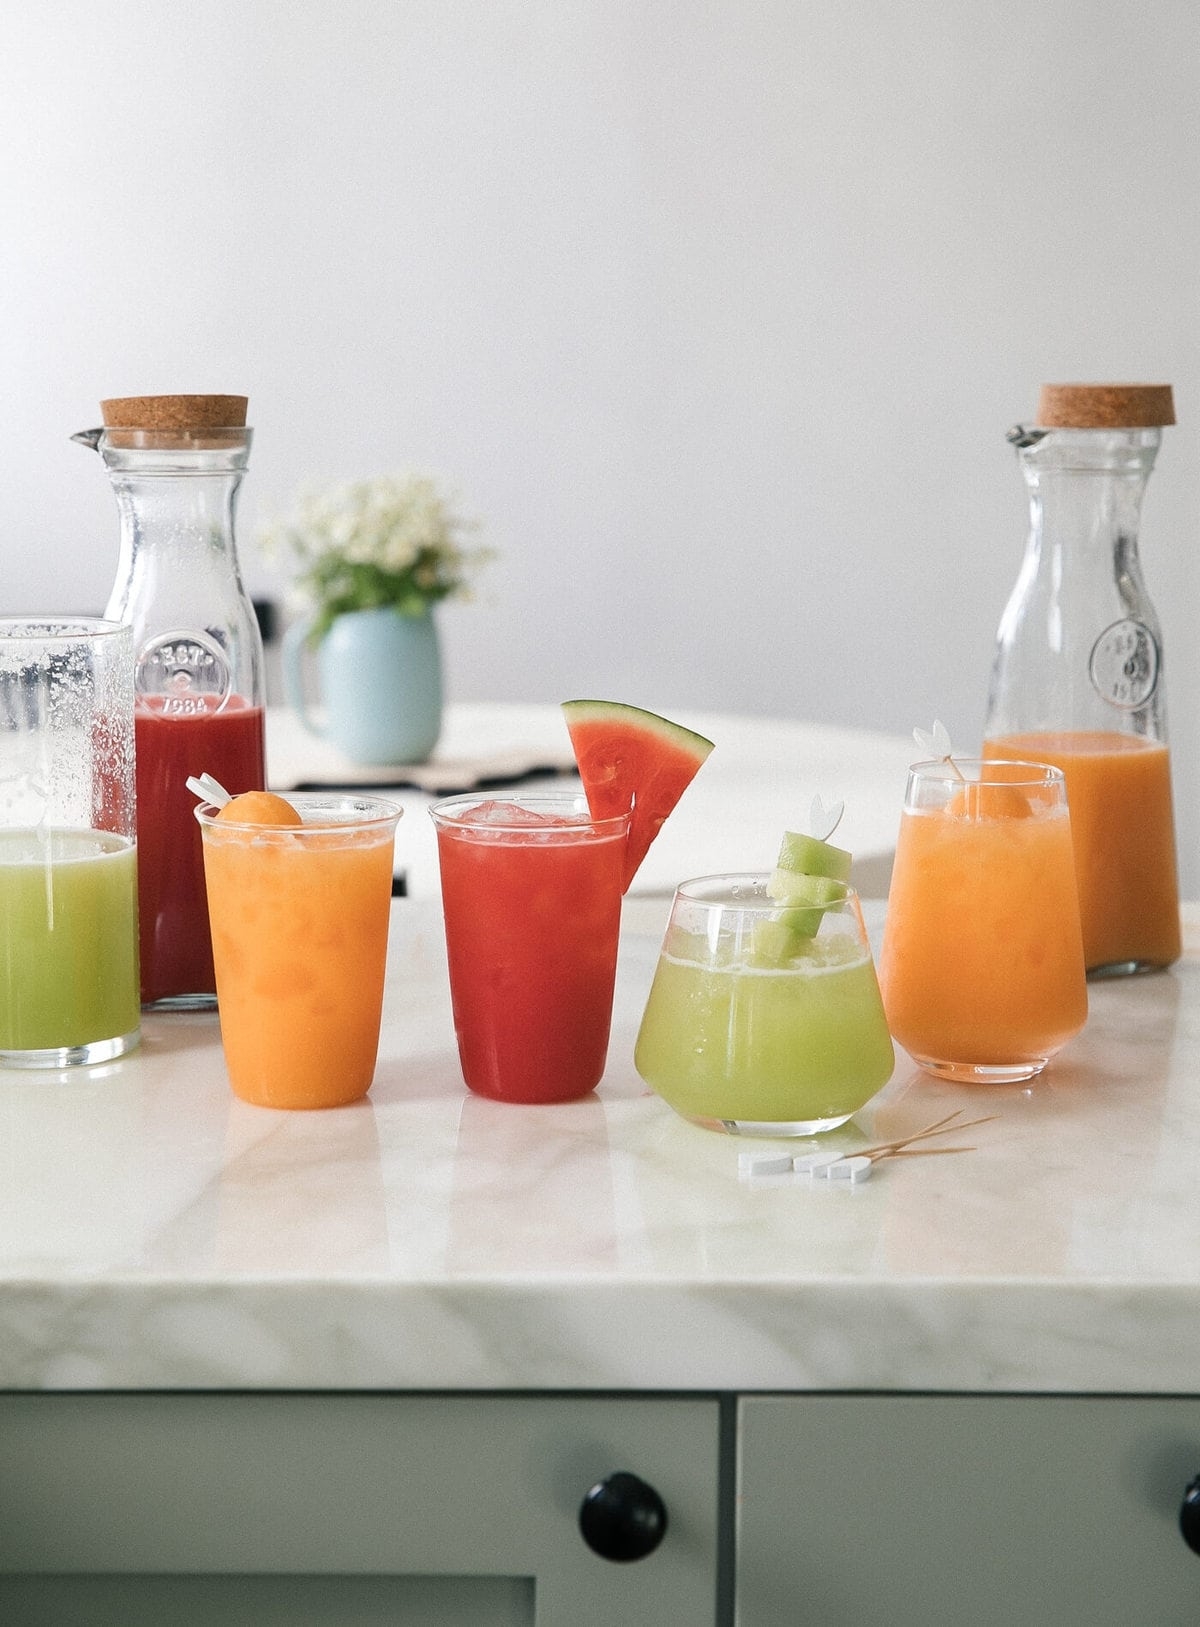 Assorted fresh juices in clear glasses on a kitchen counter, with two bottles in the background